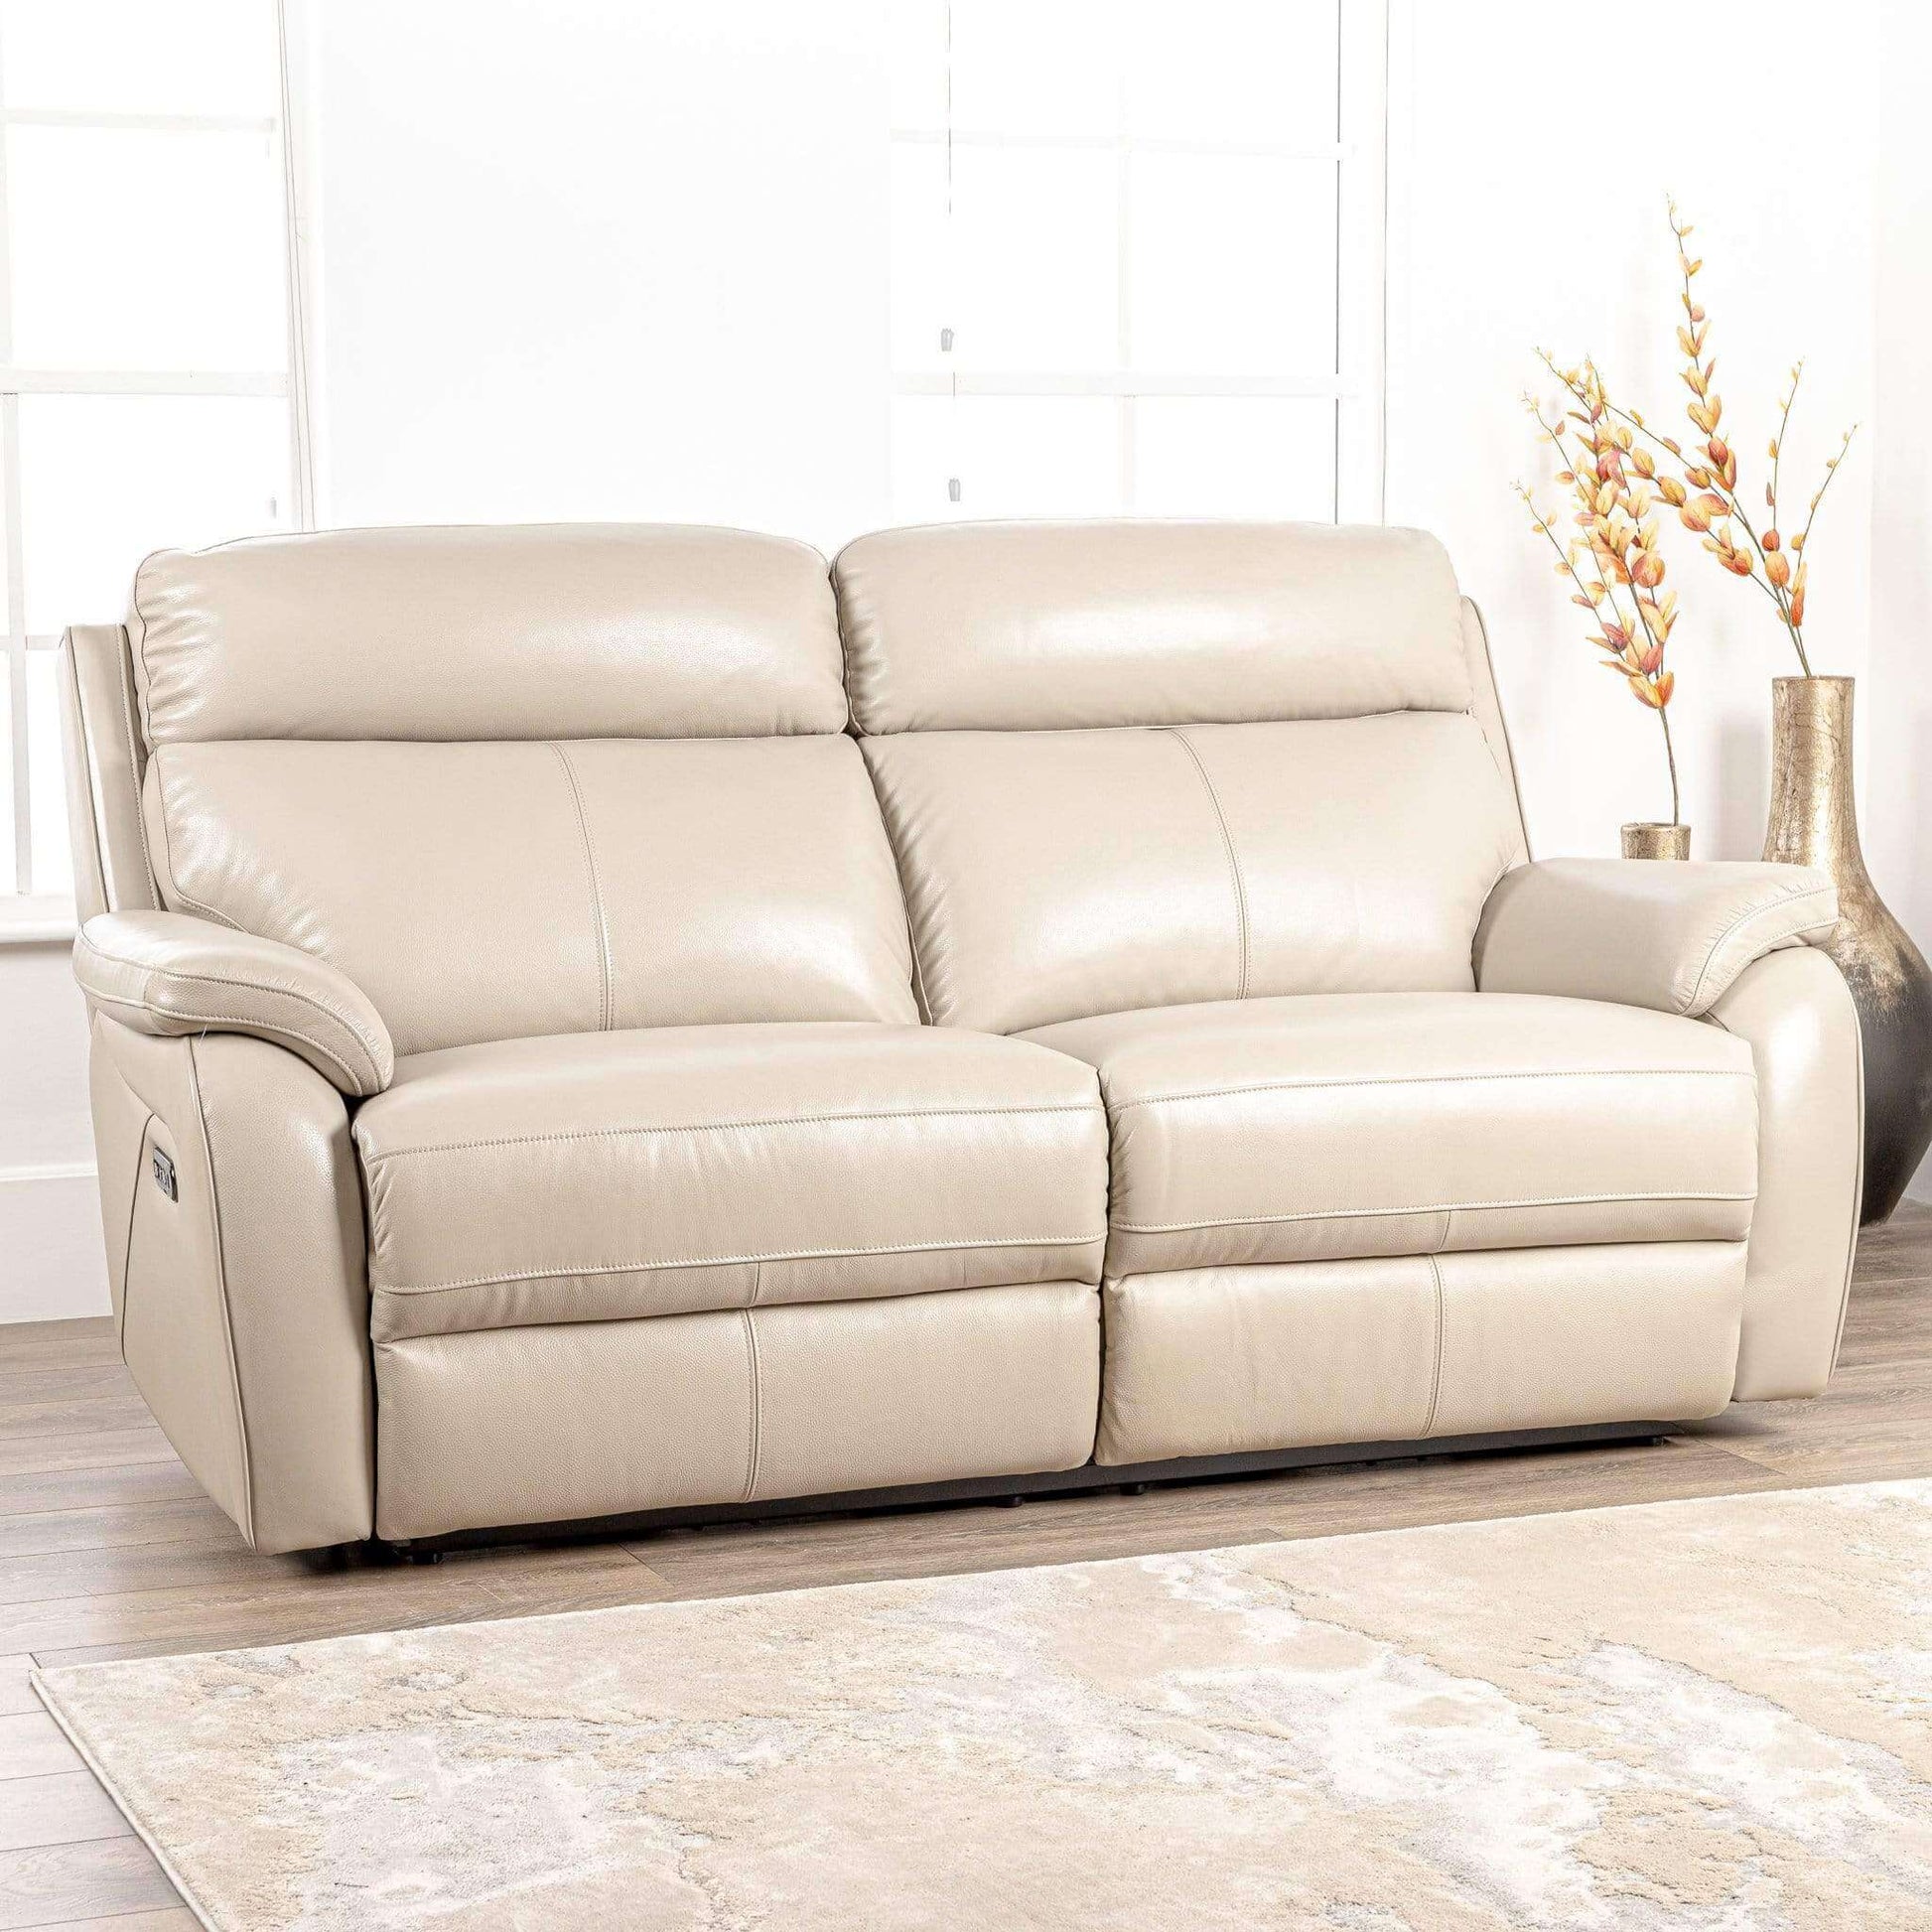 Furniture  -  Comfort King Quincy 2.5 Seat Electric Reclining Sofa  -  50153204